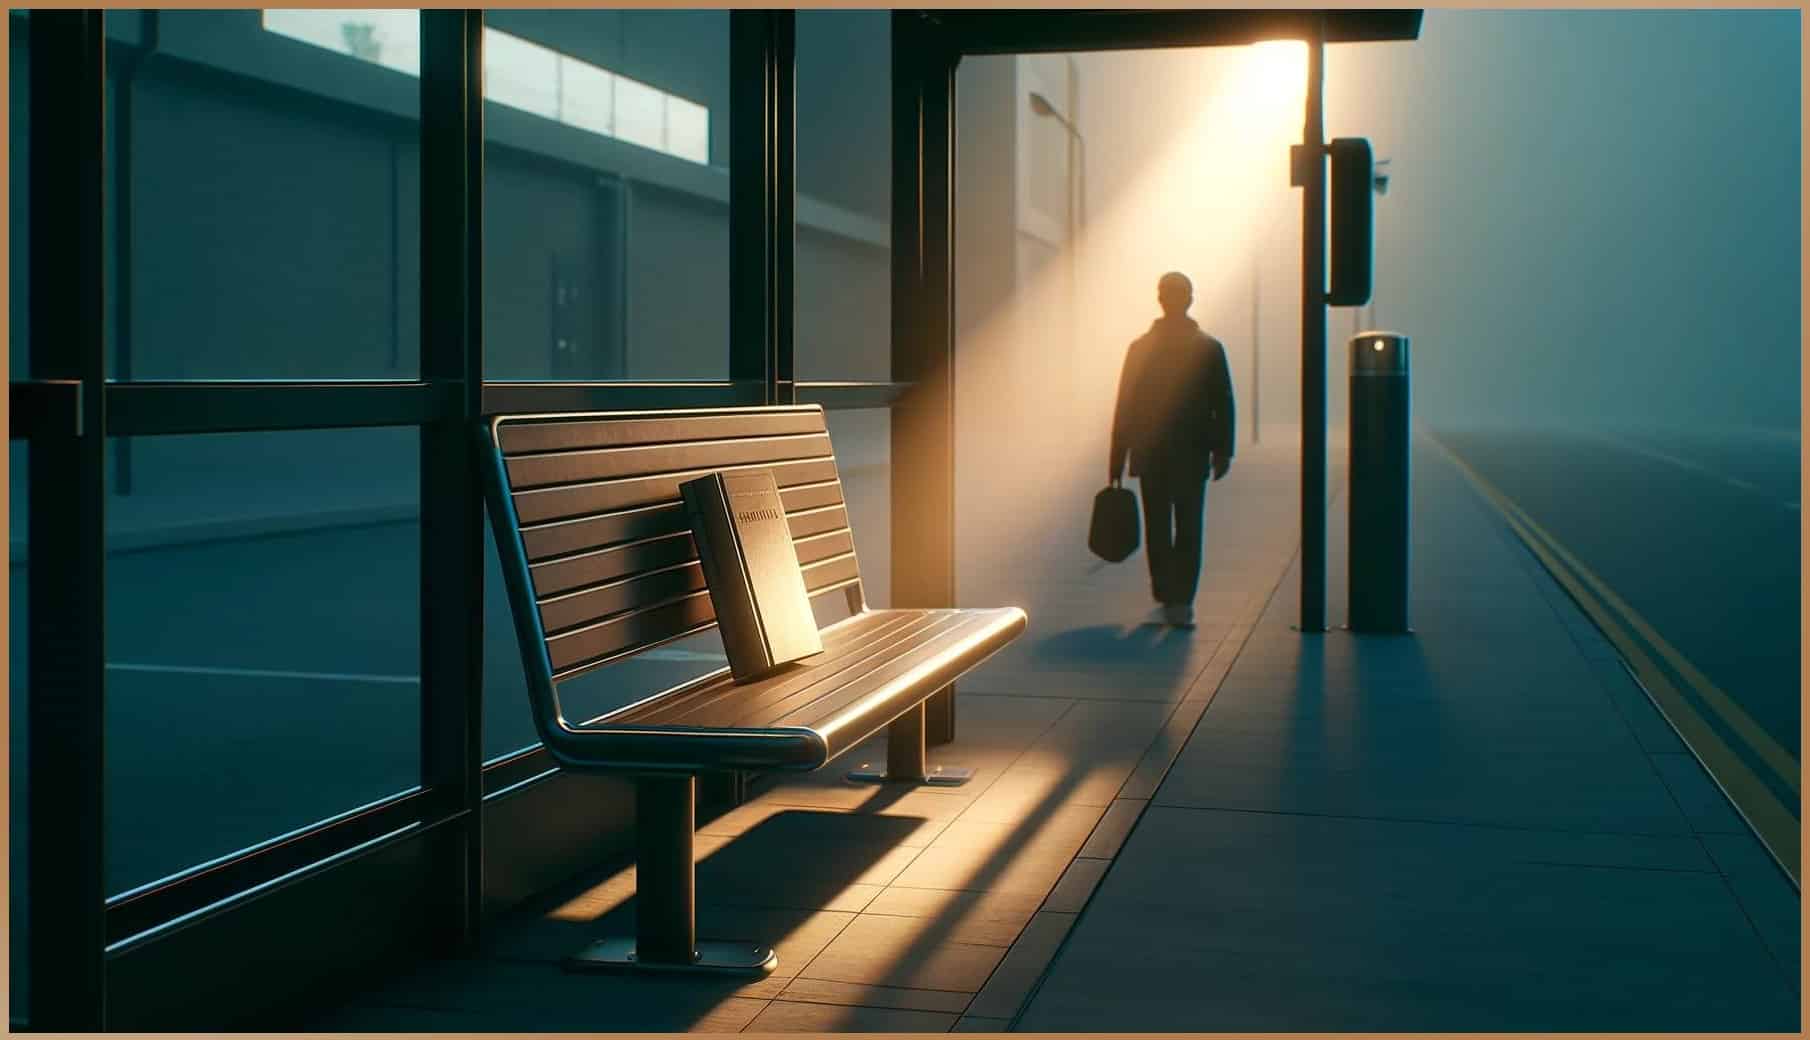 An image of an early evening bus stop scene, highlighting a single book on a bench bathed in a soft, natural glow, symbolizing a serendipitous discovery and the concept of synchronicity.